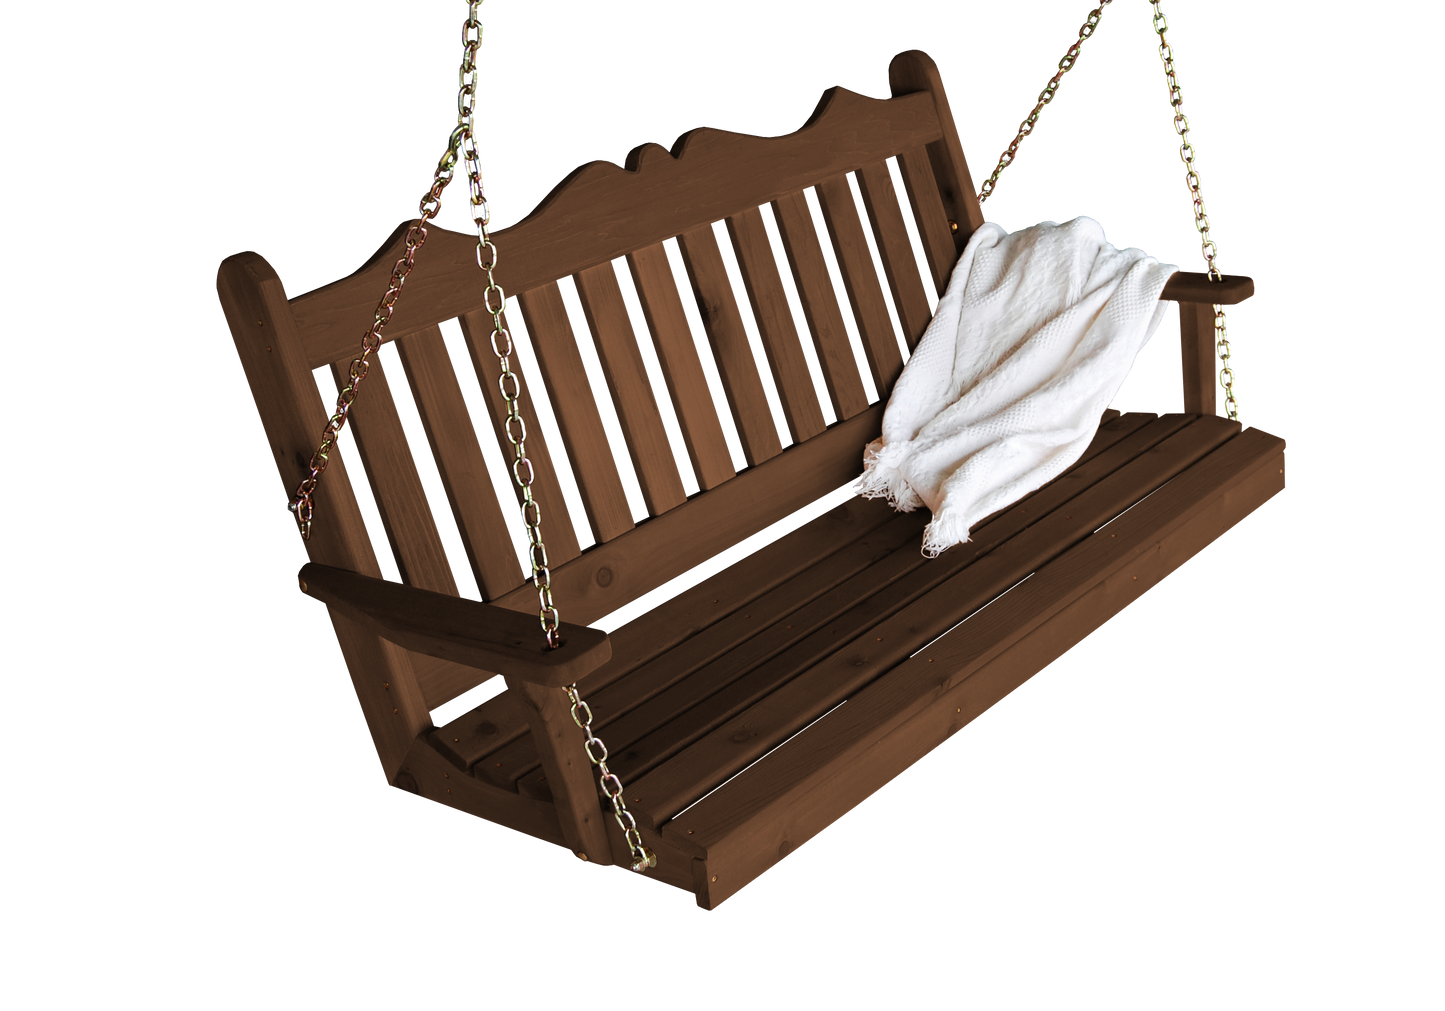 A&L FURNITURE CO. Western Red Cedar 4' Royal English Garden Swing - LEAD TIME TO SHIP 2 WEEKS